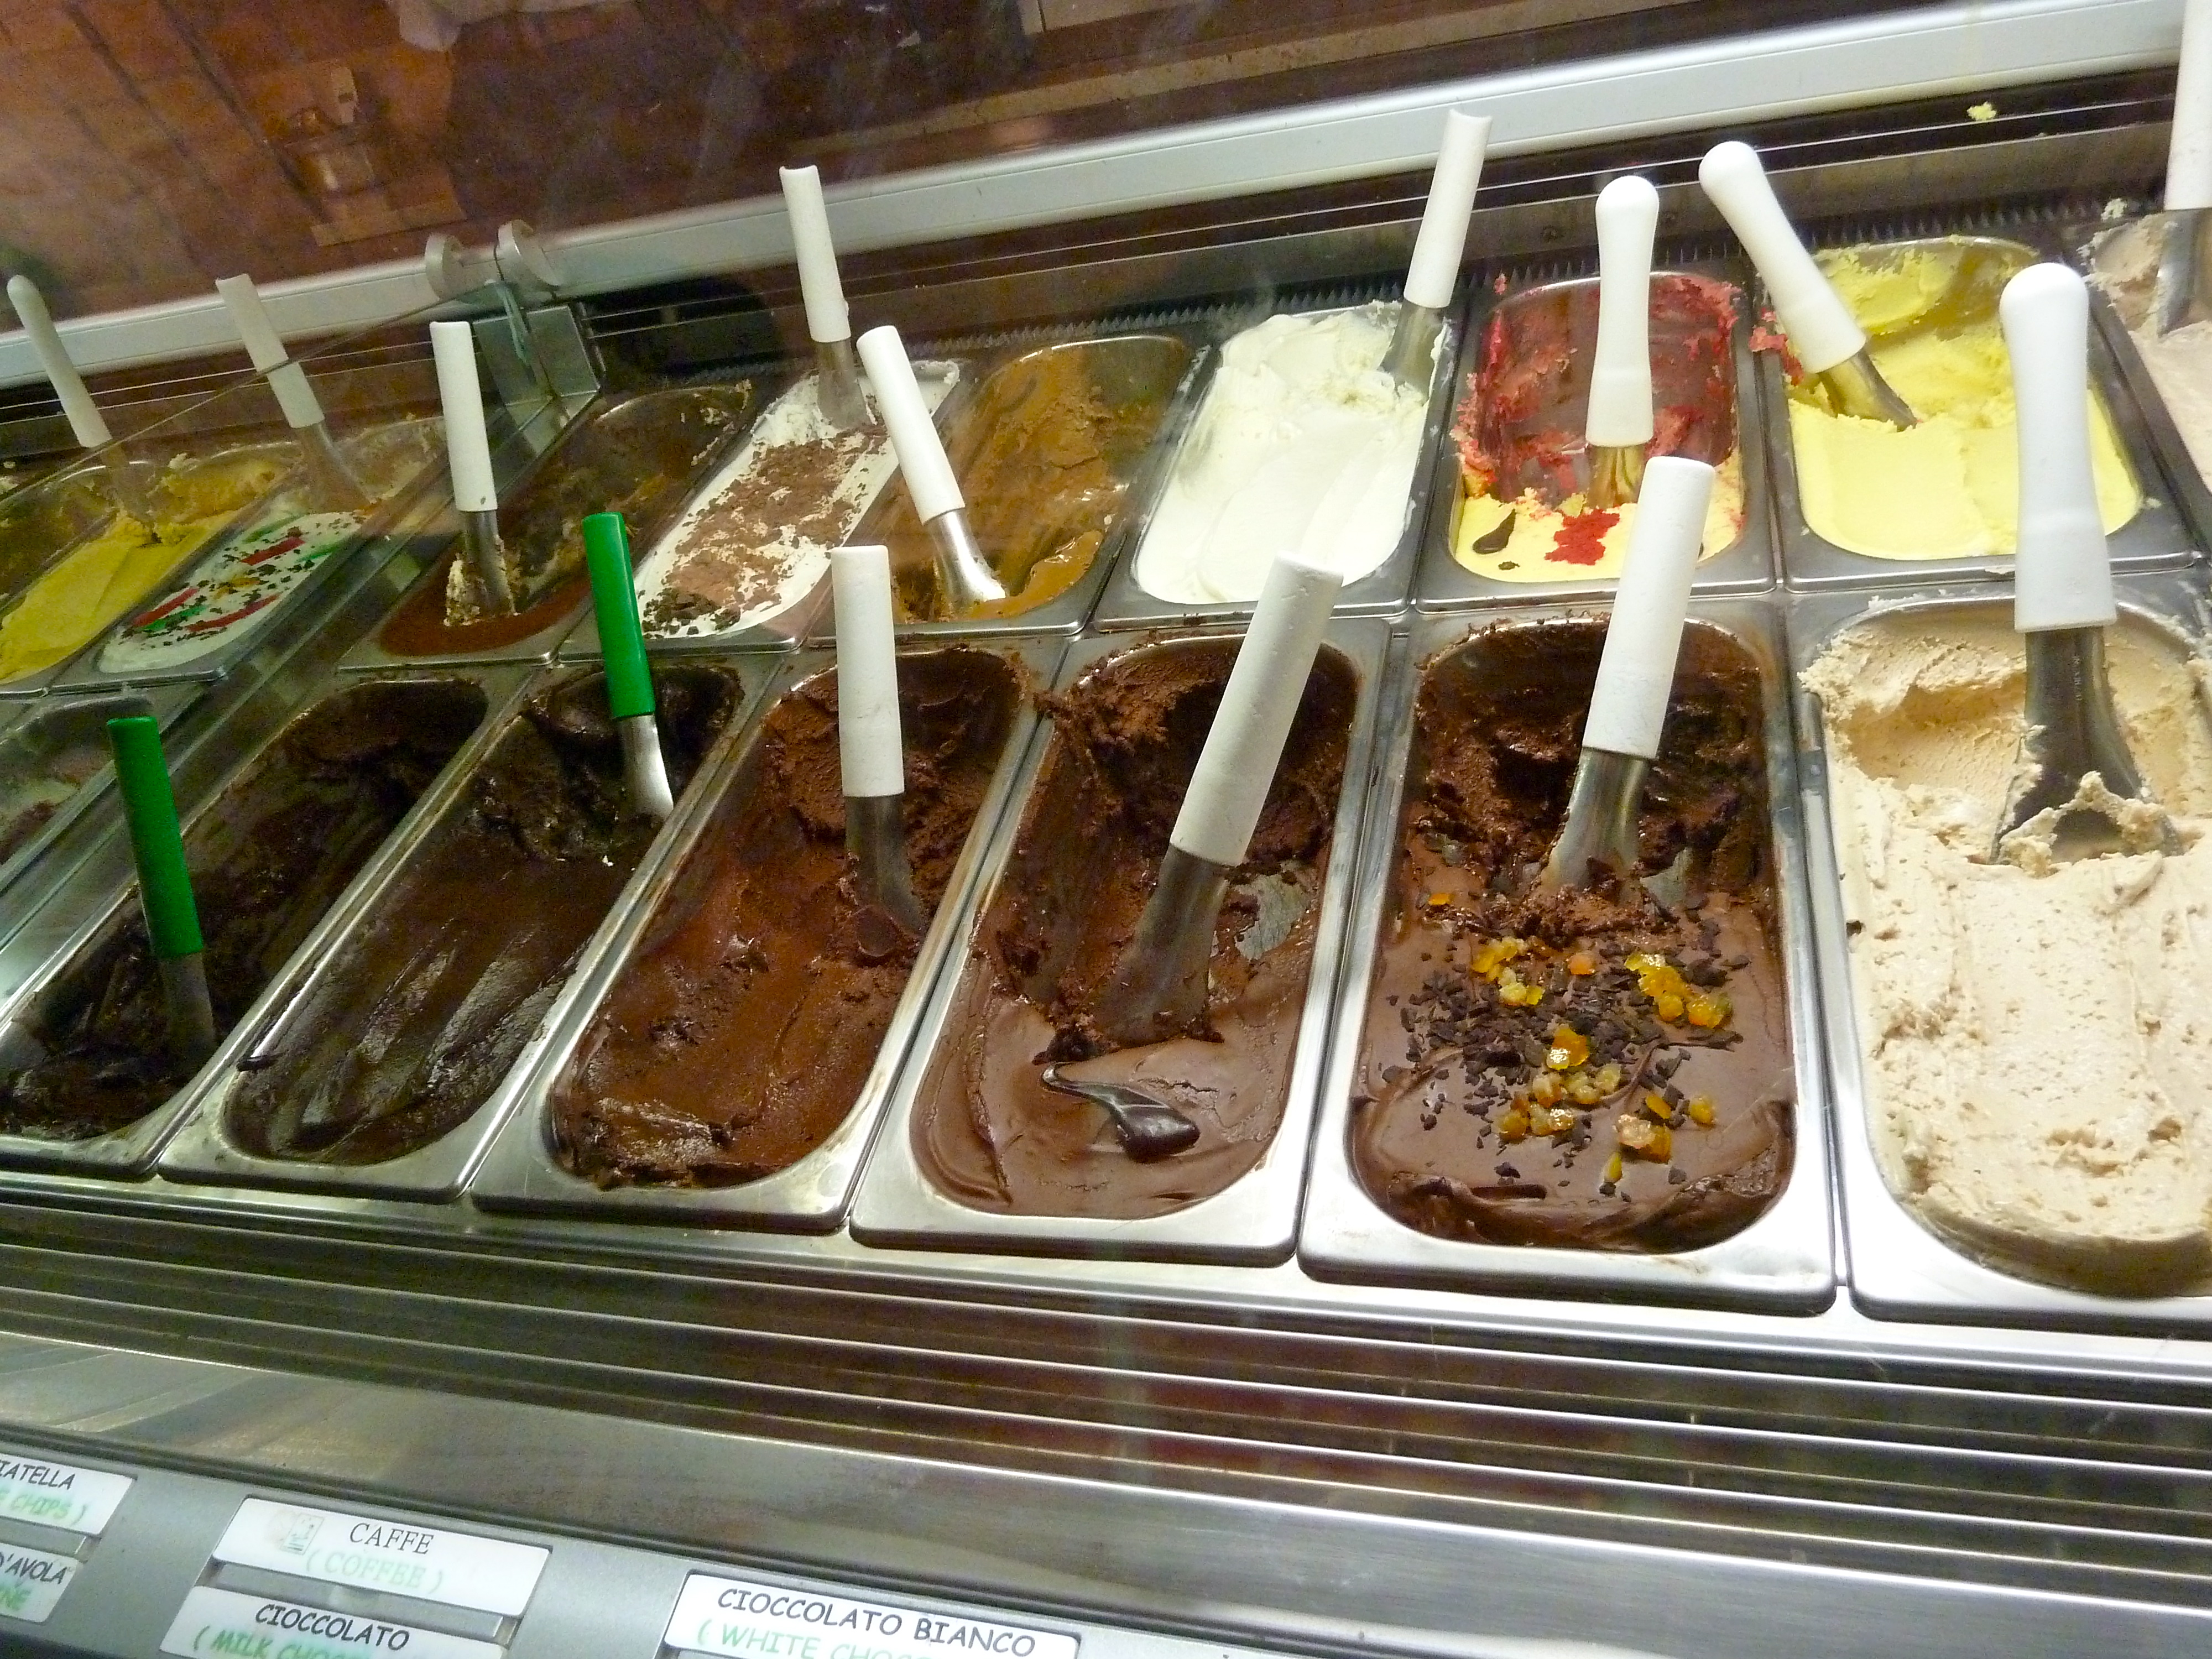 Get the Scoop on the Best Italian Gelato in all of Rome